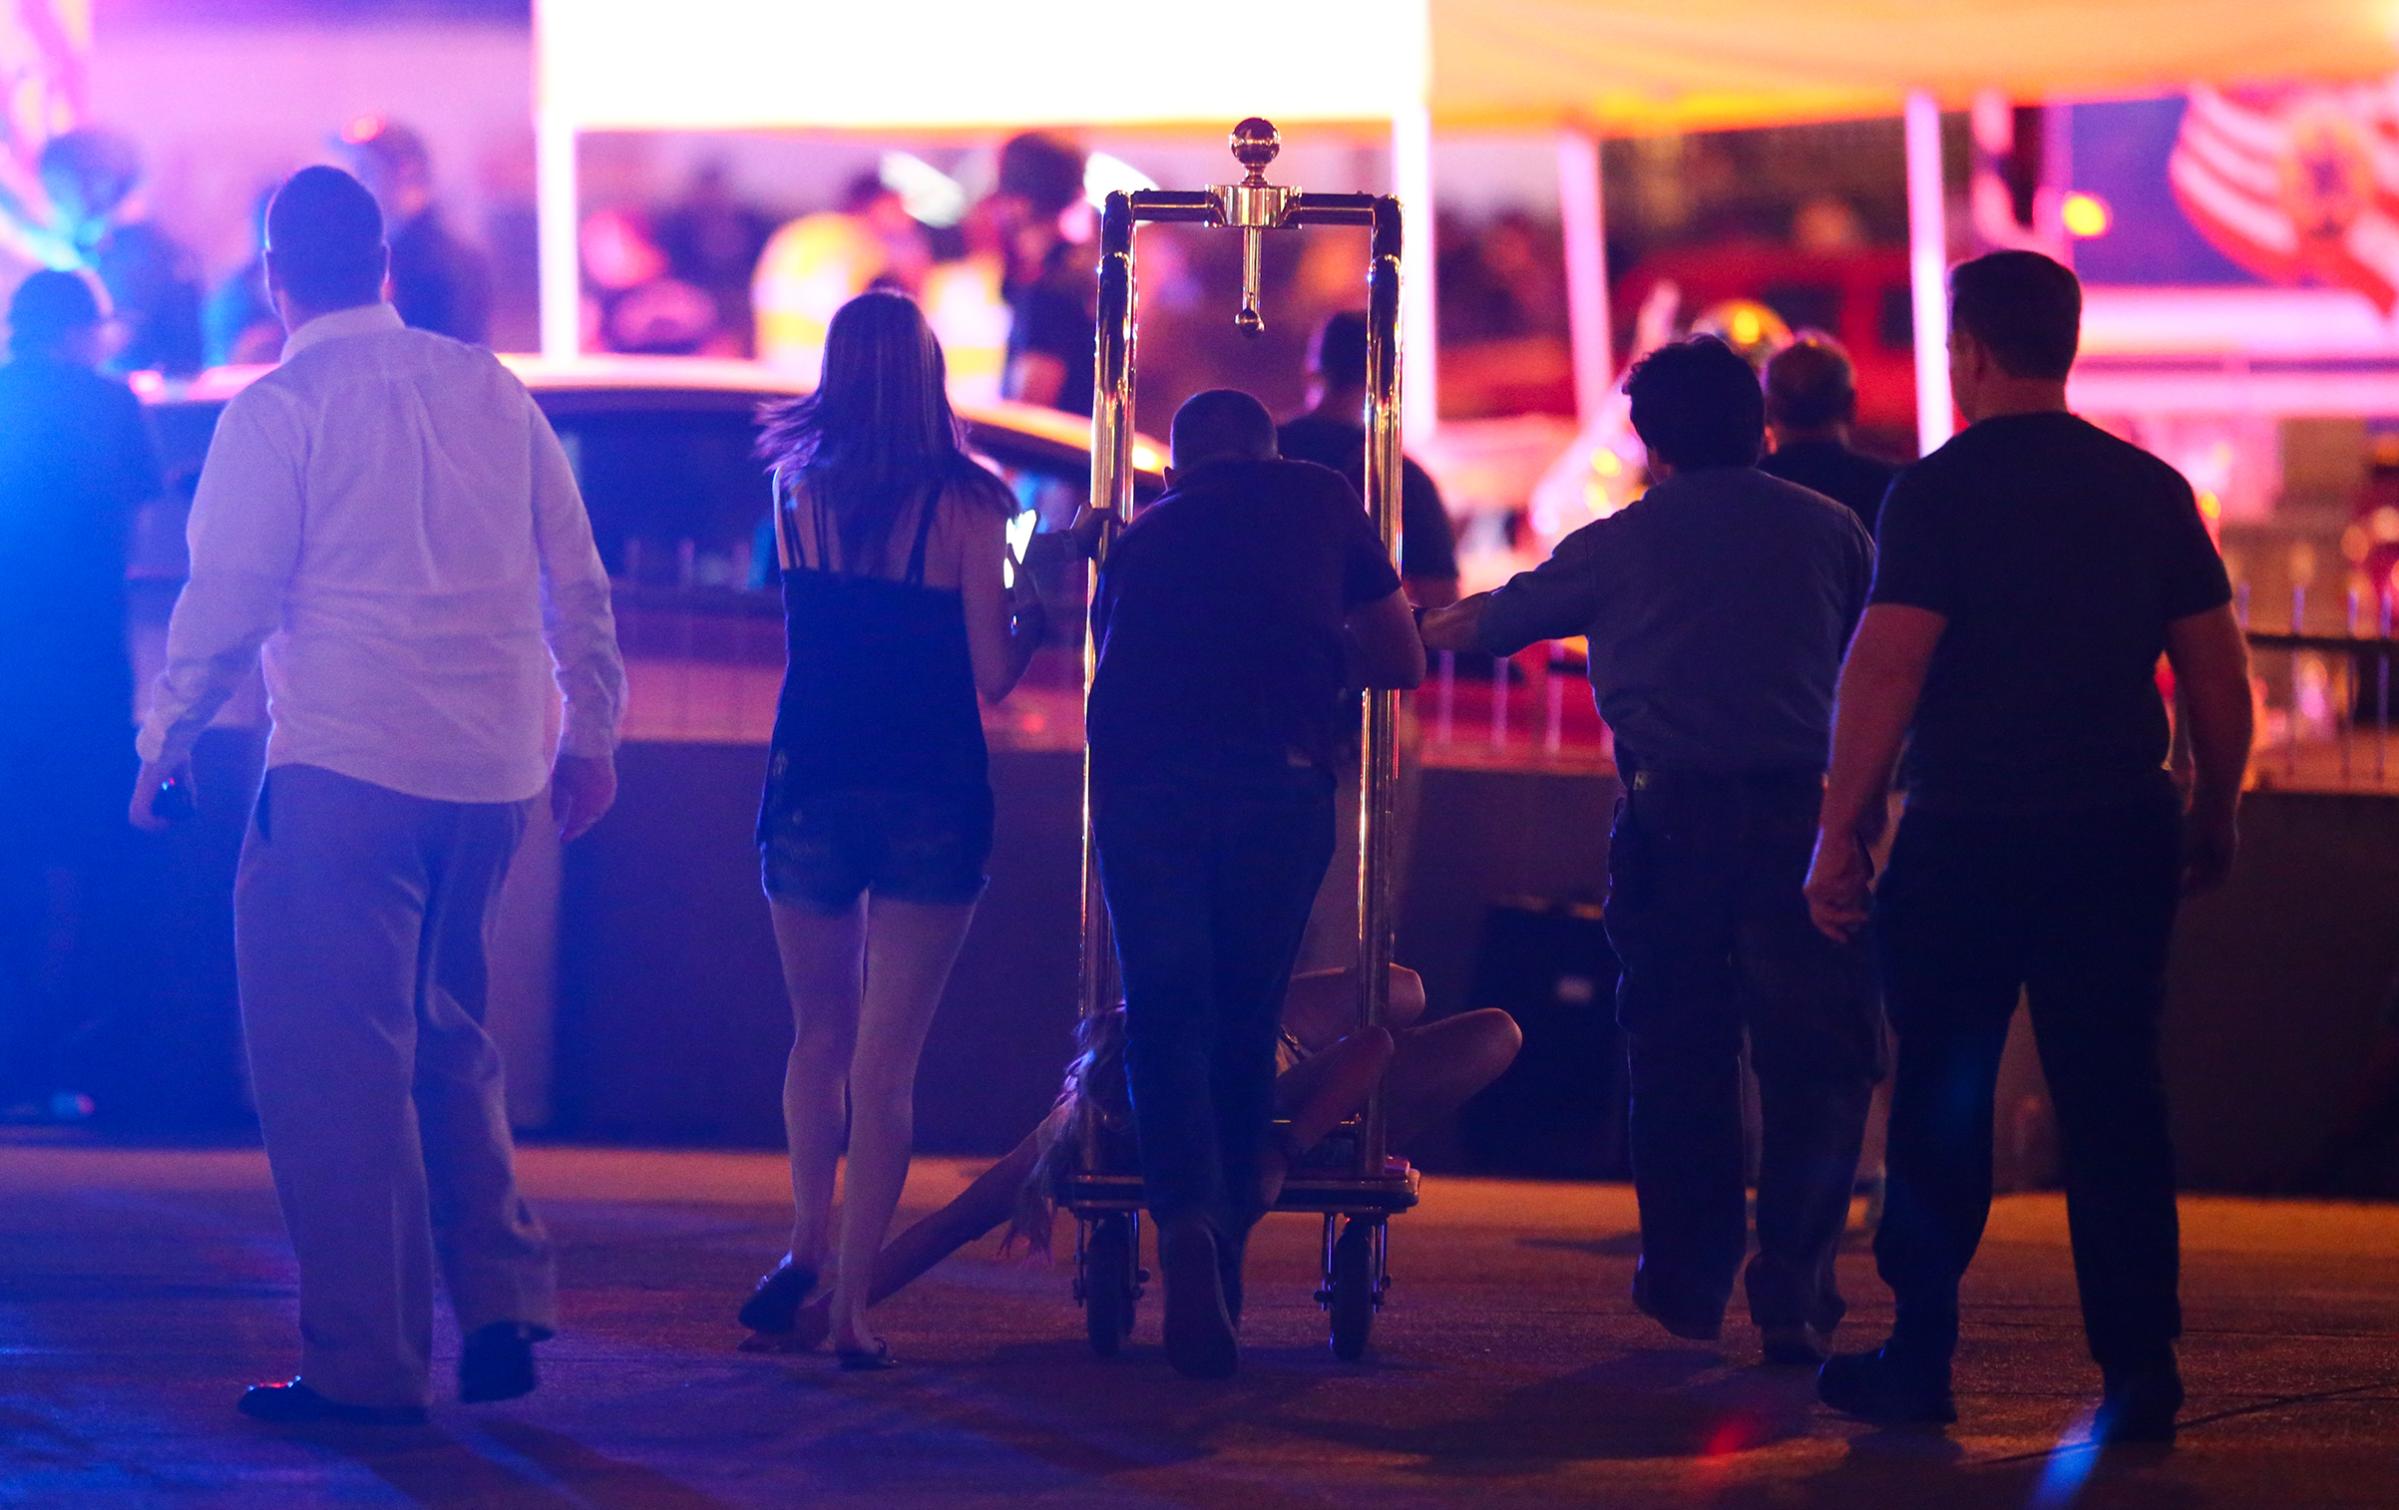 A wounded woman is transported outside the Tropicana during an active shooter situation on the Las Vegas Strip on Oct. 1, 2017.